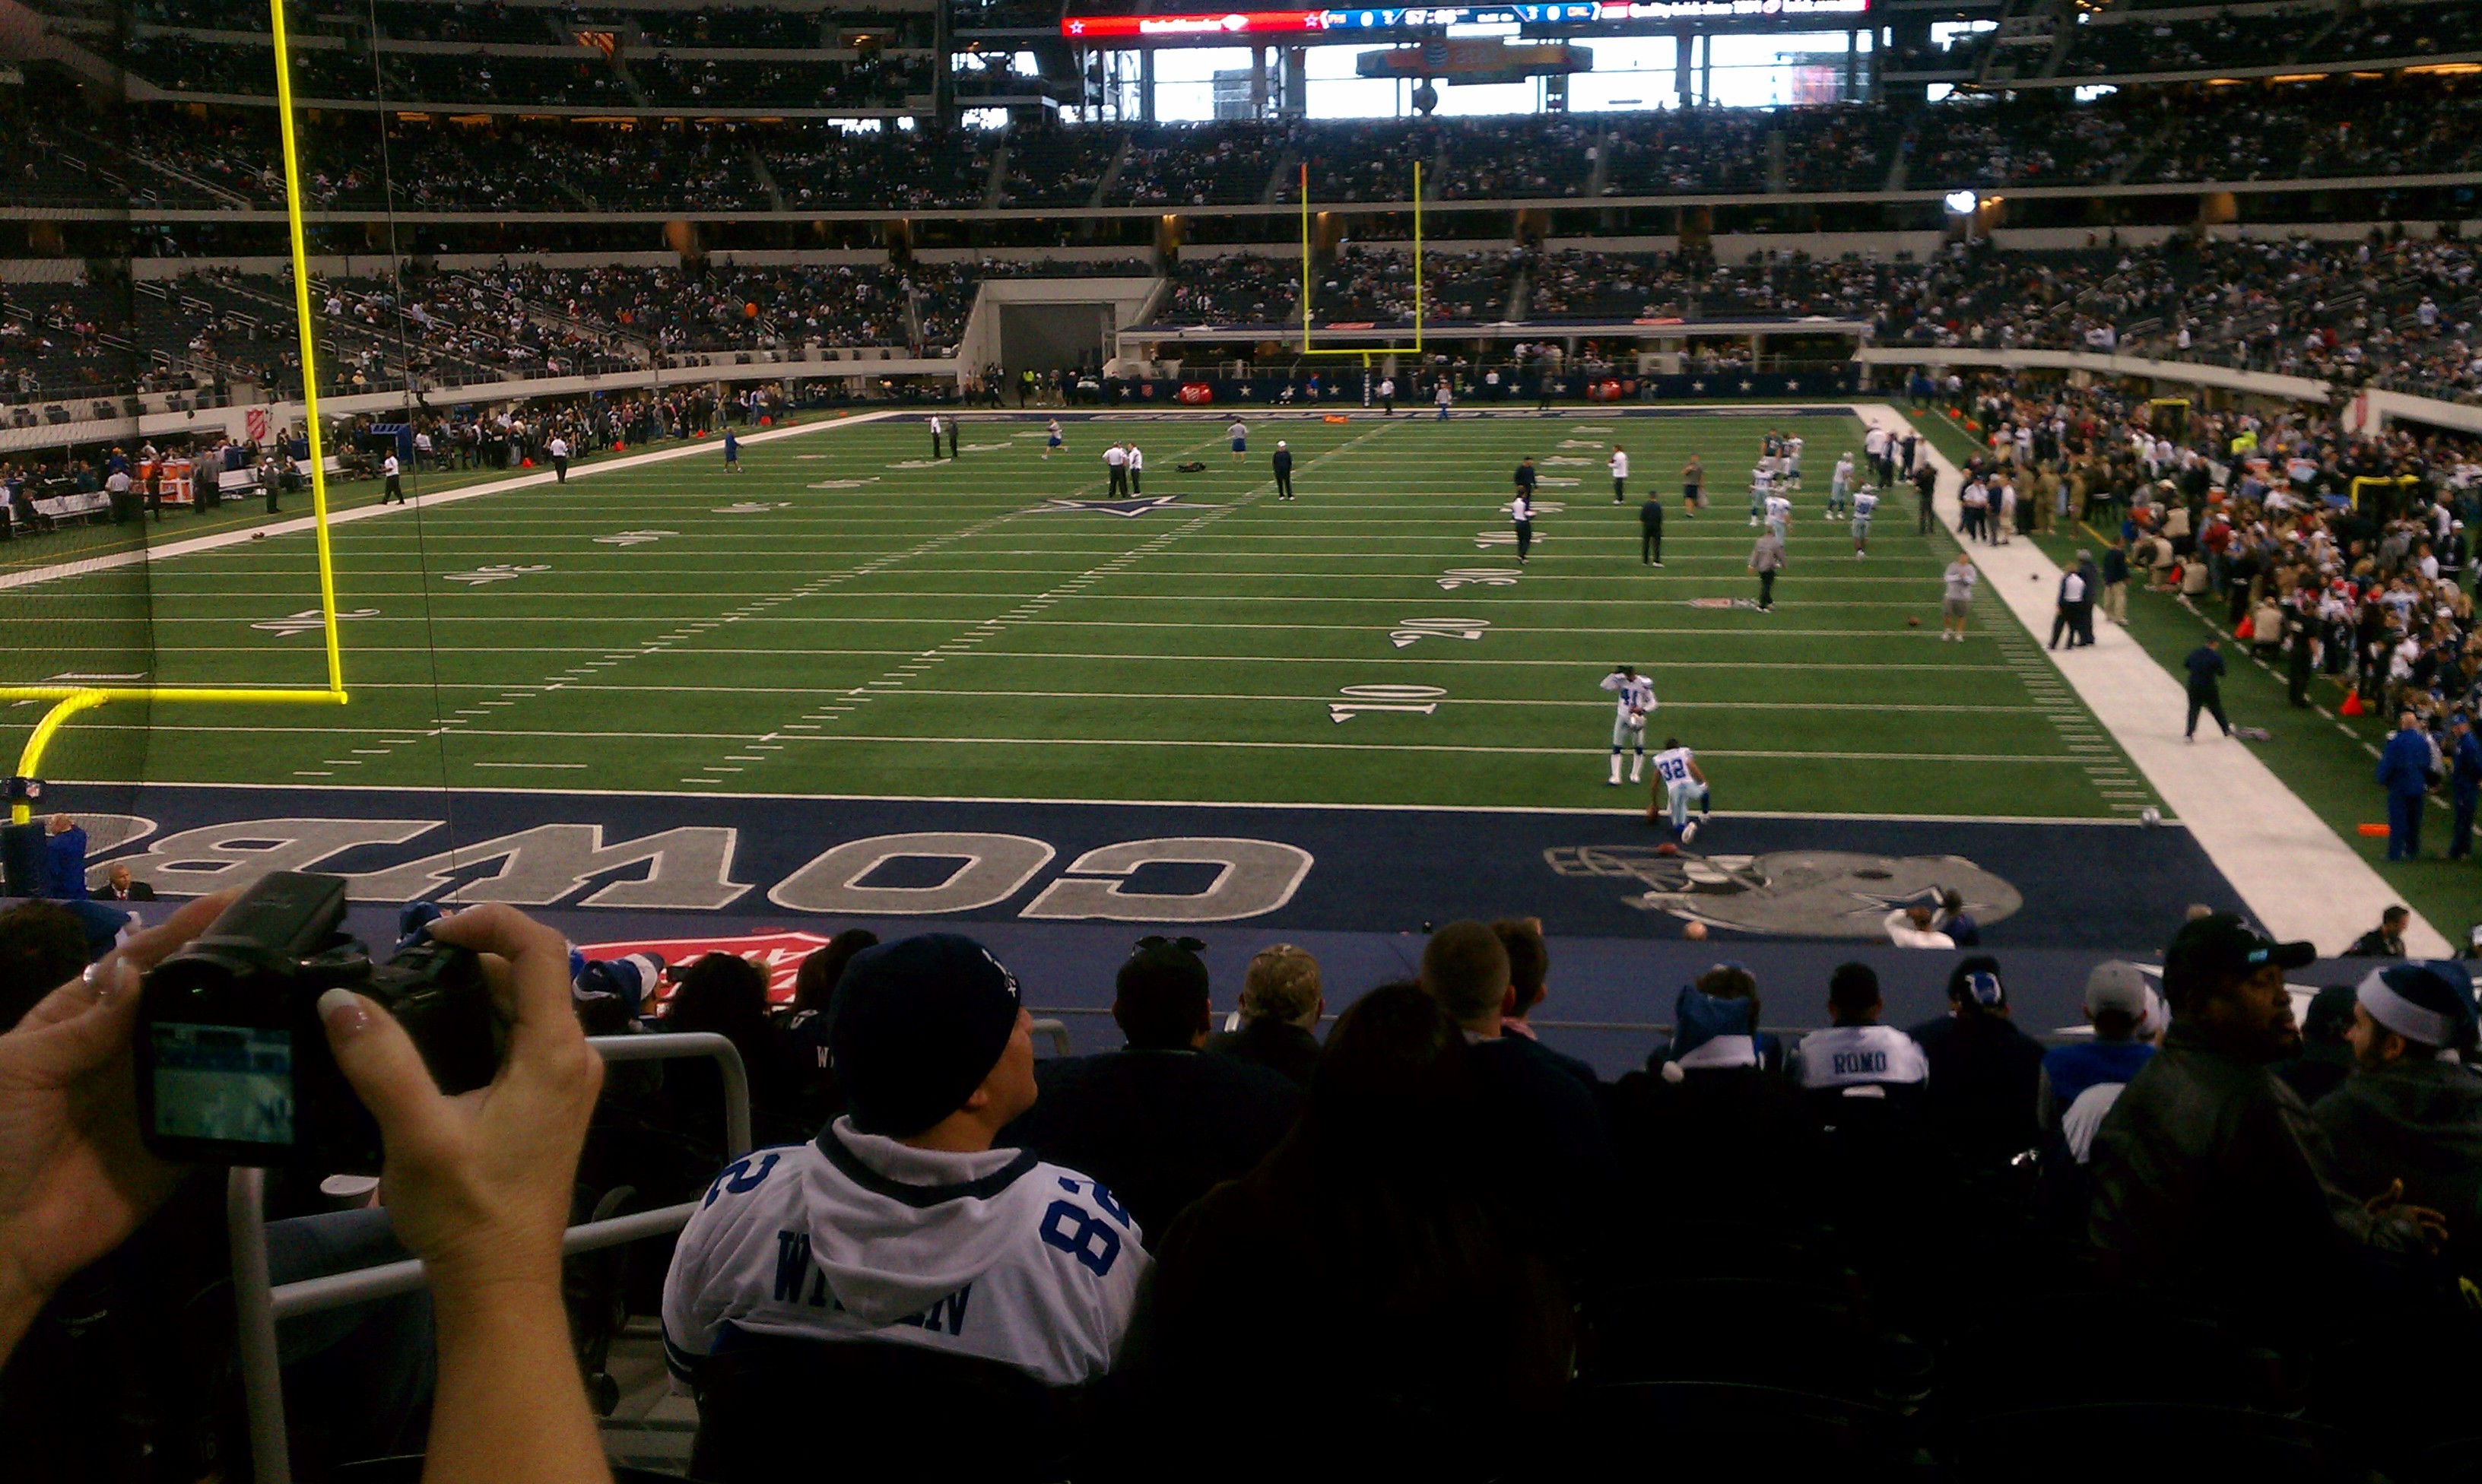 3264x1952 ... Seating view for att stadium section 121 row 21 seat 28 ...